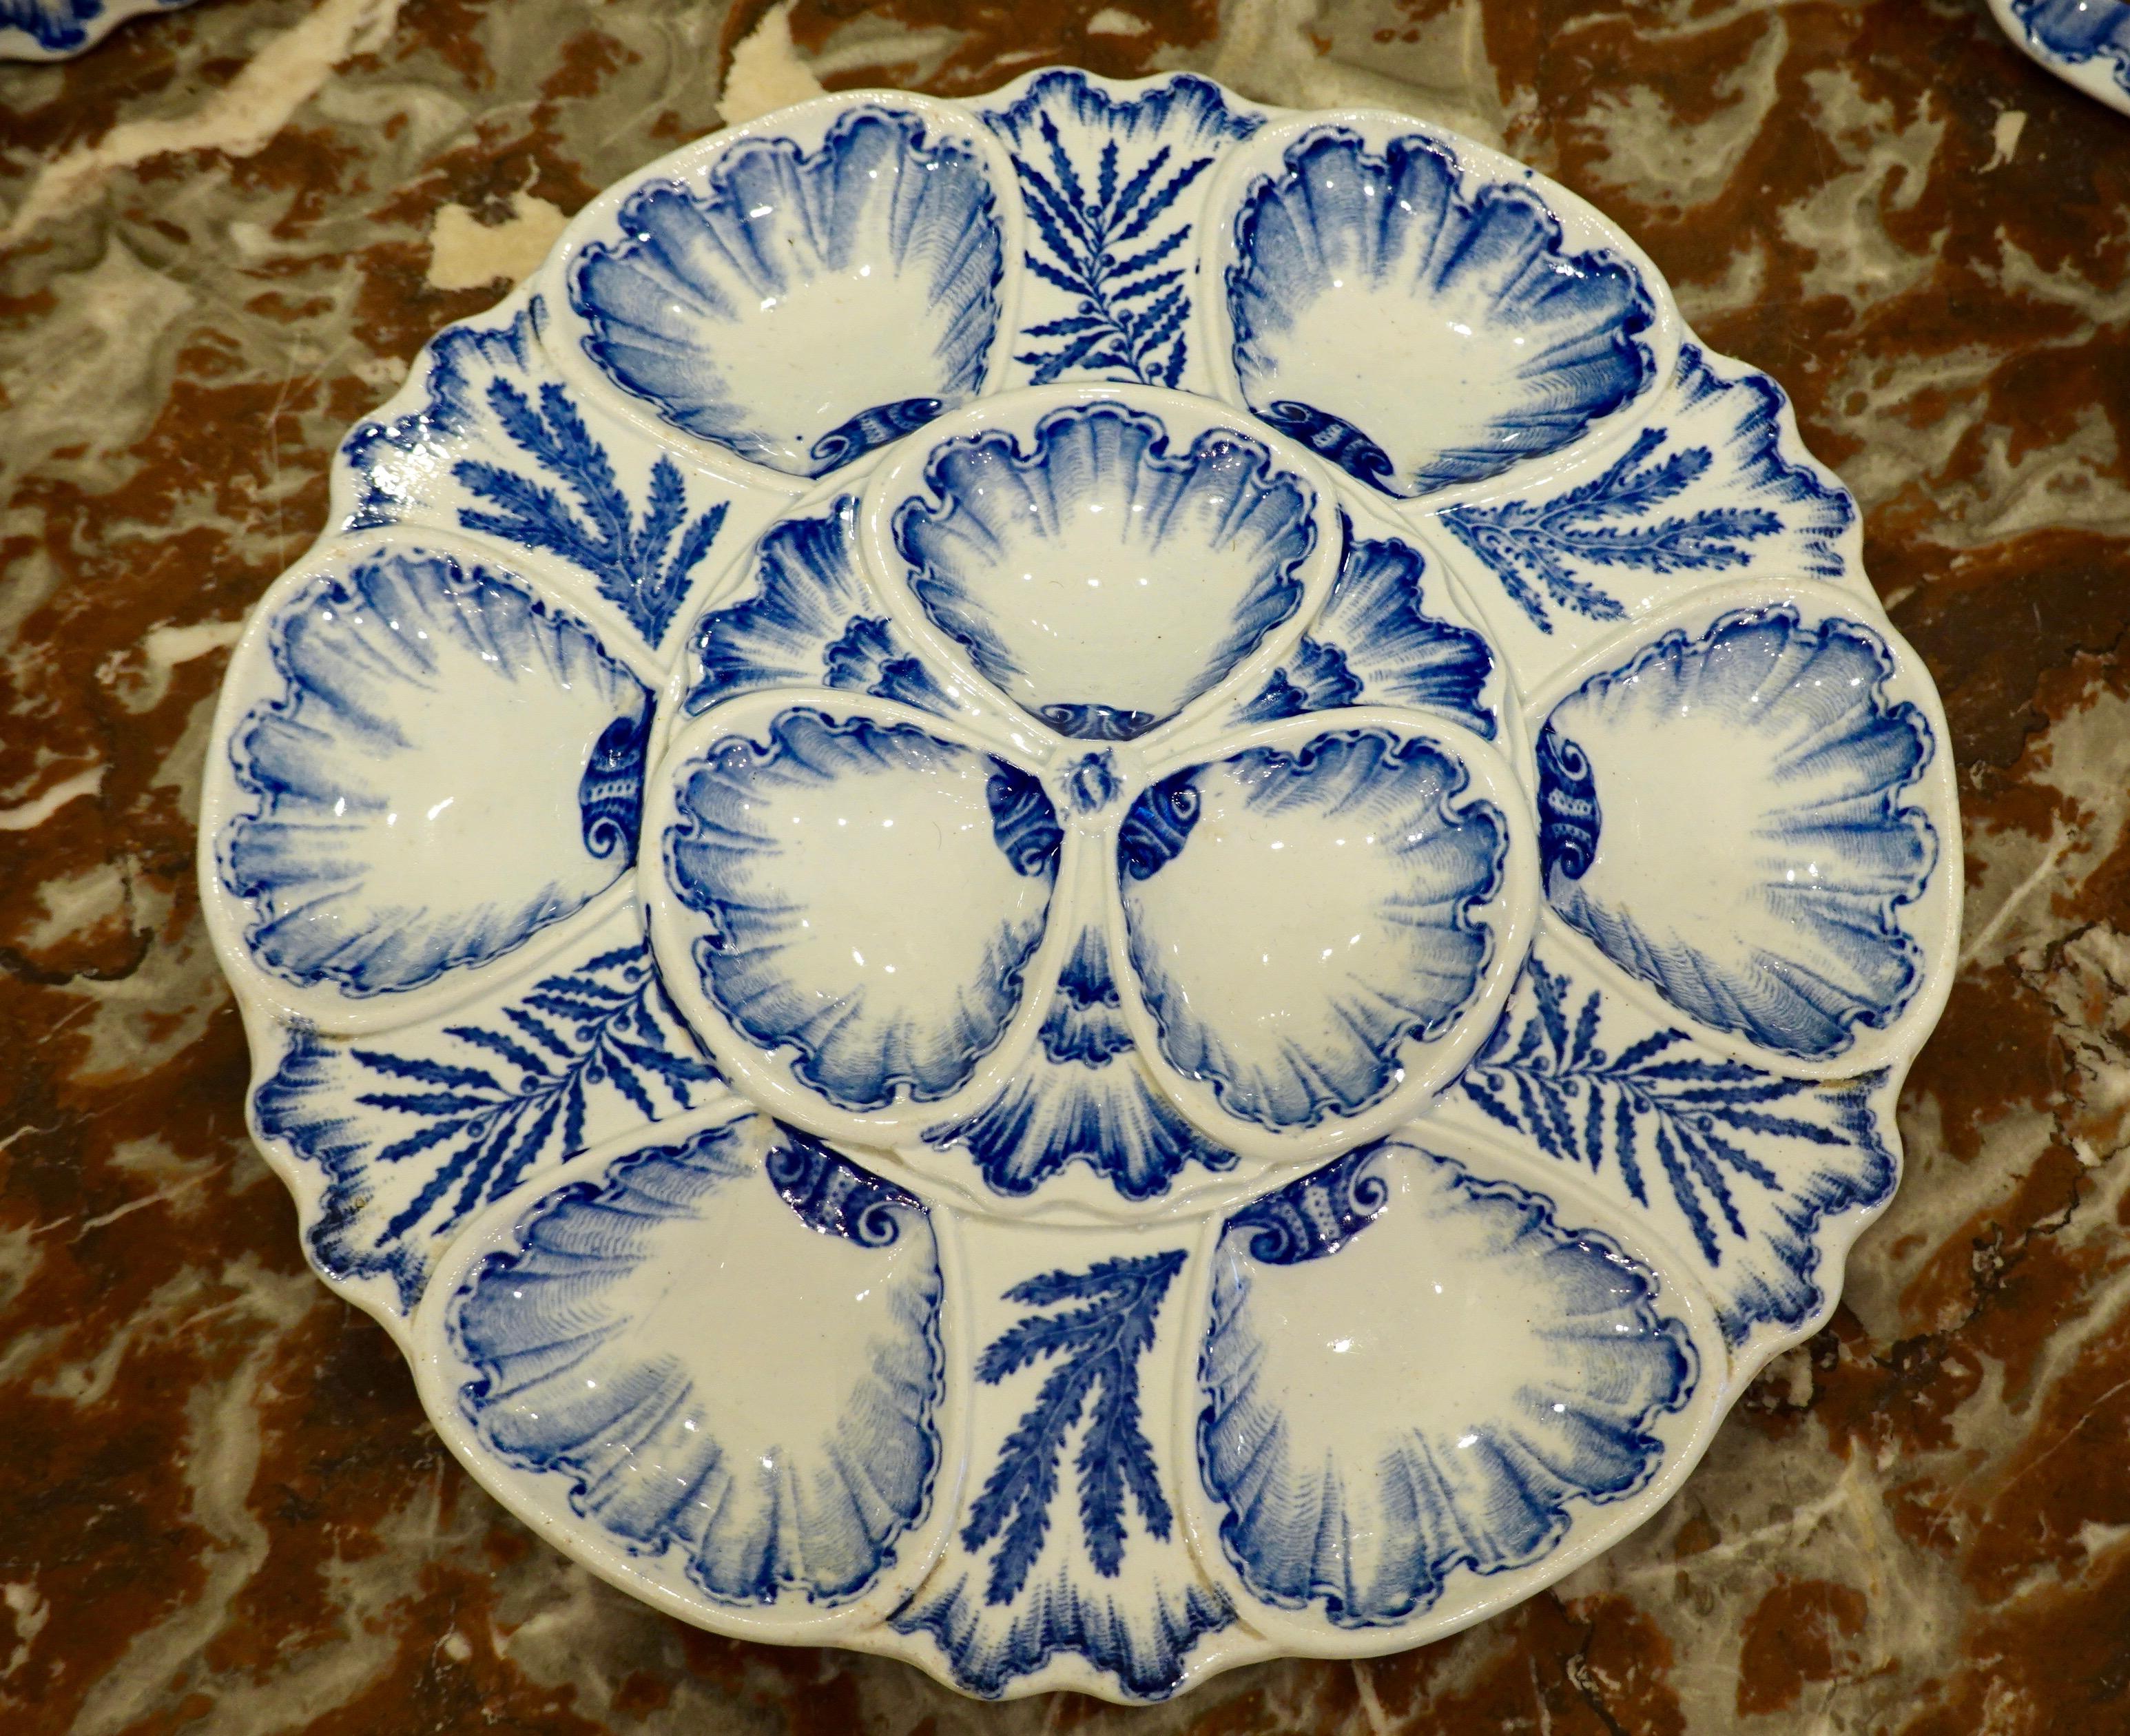 Faience Set of Six 19th Century French Blue and White Oyster Plates from Bordeaux